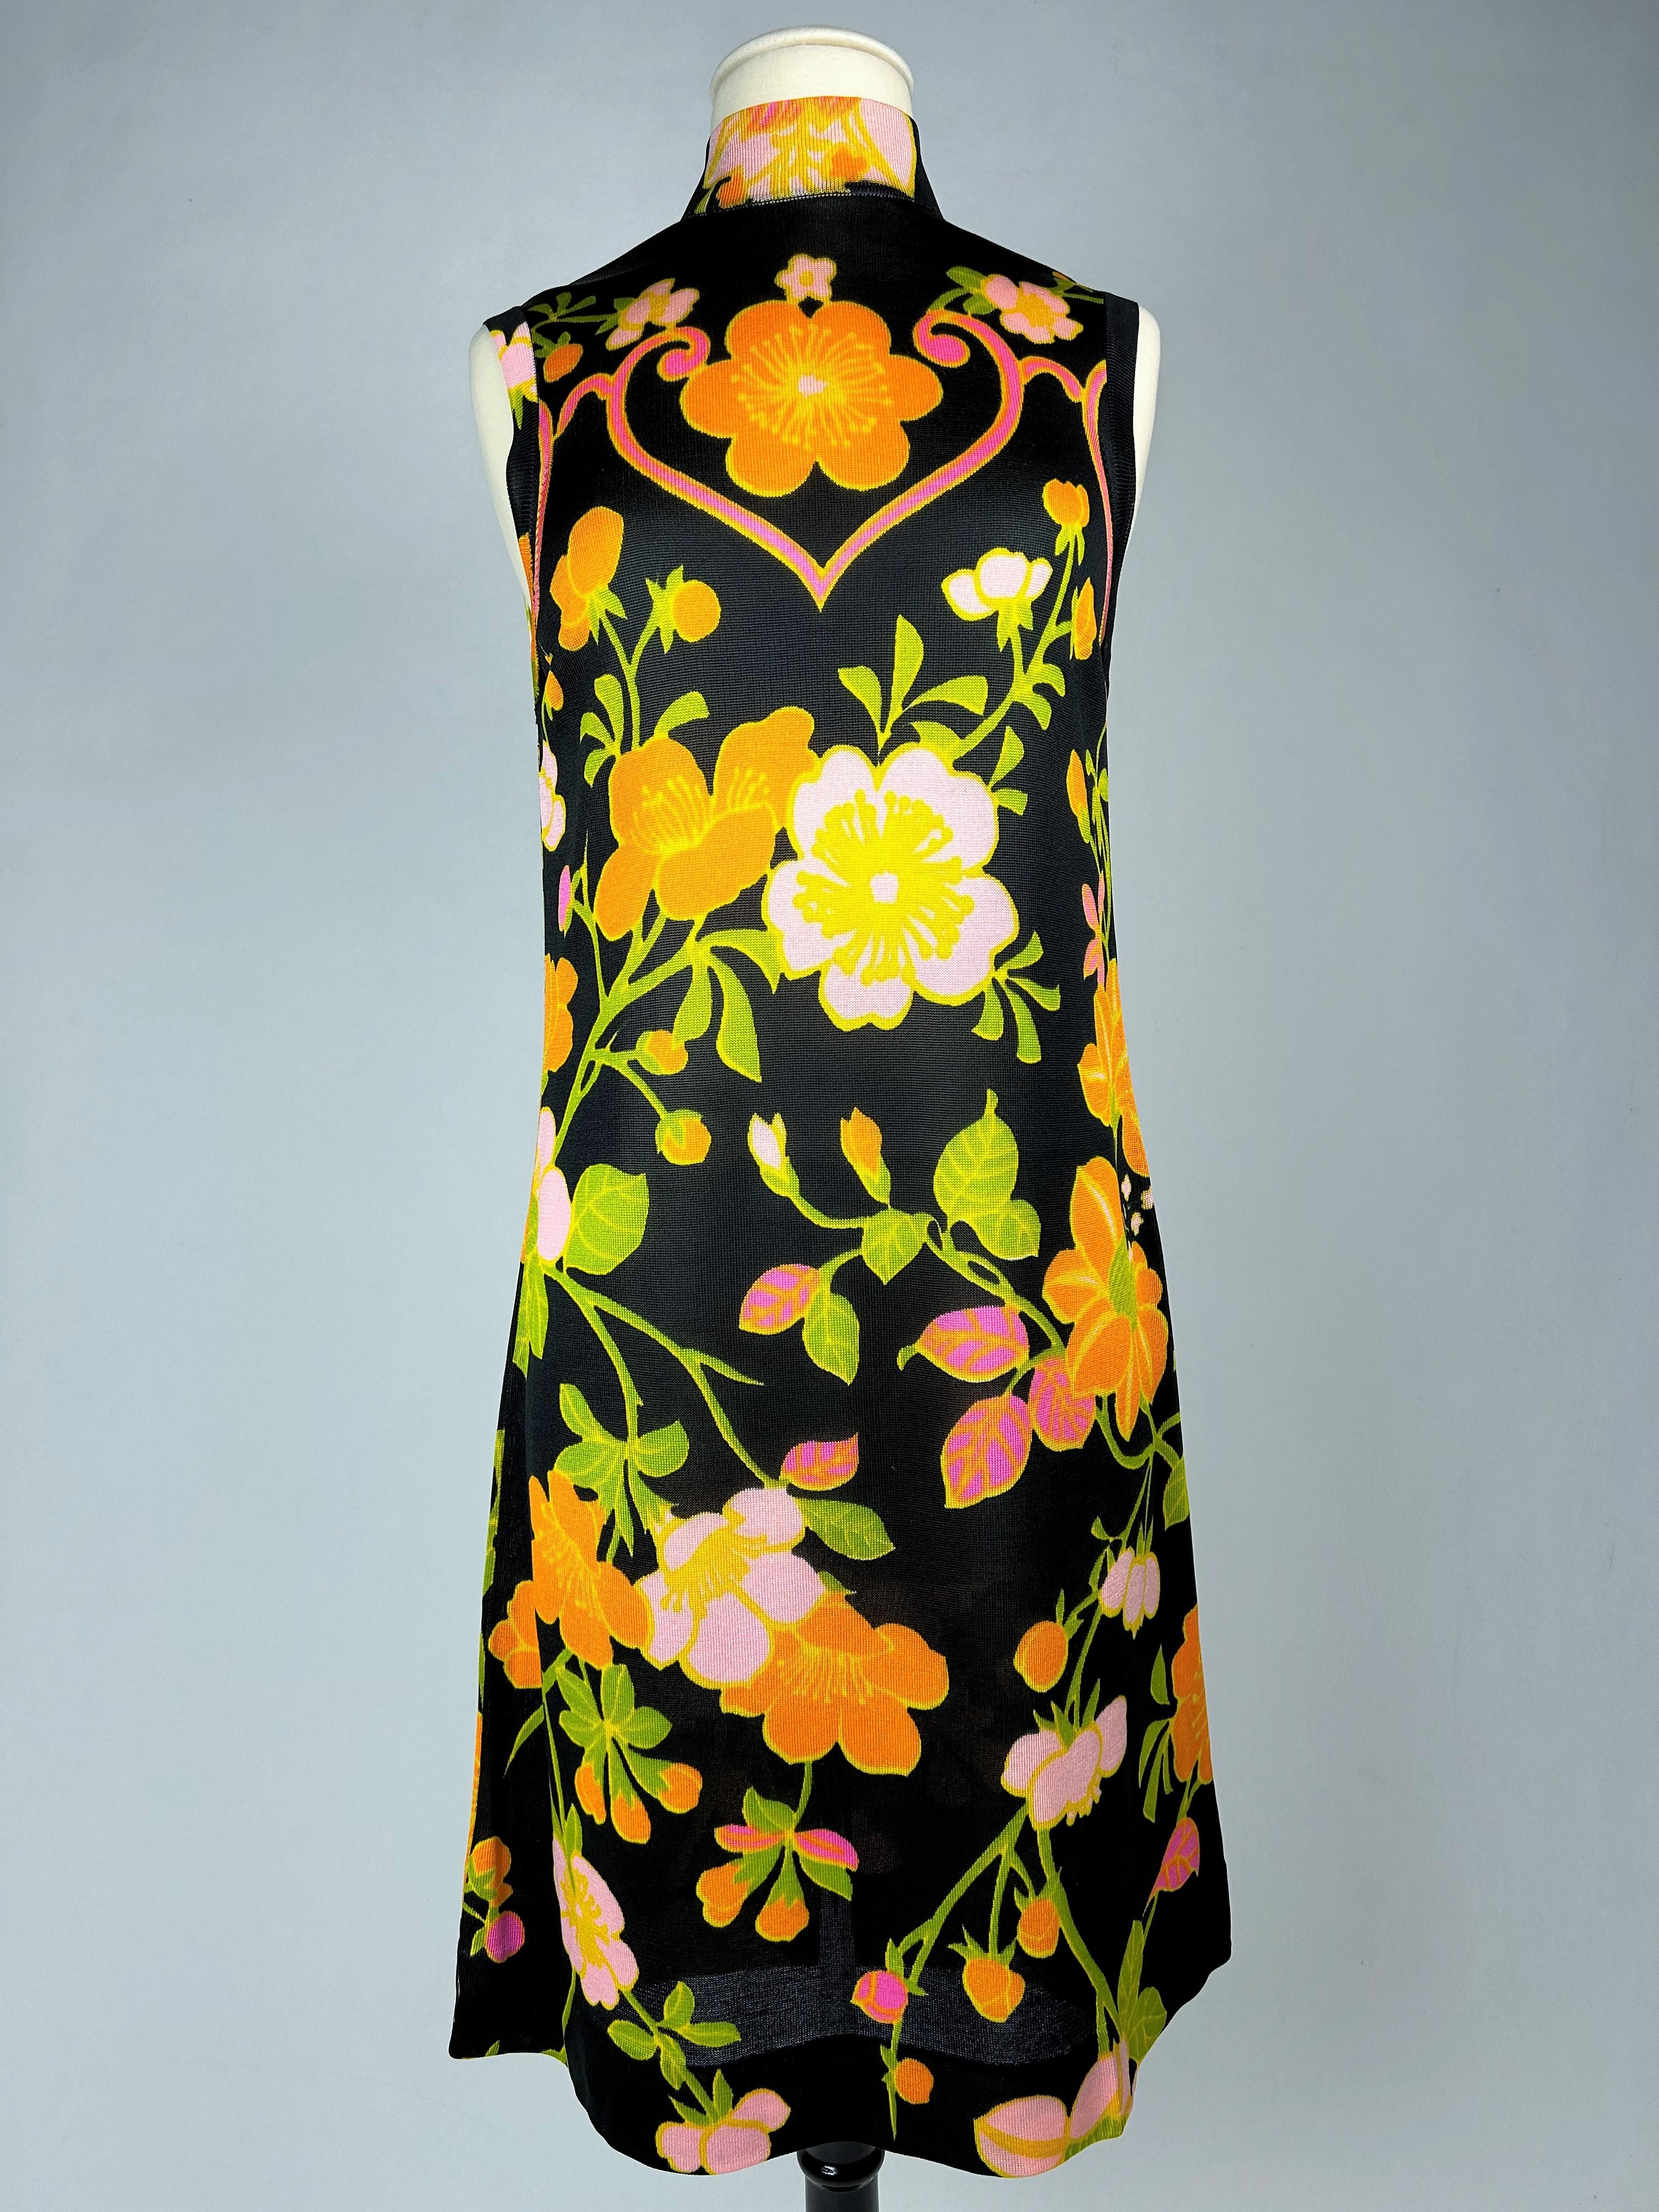 Circa 1968

France

A Printed silk knit mini-dress by Léonard Paris, dating from the late 1960s. Sleeveless sack dress style straight cut and Mao collar with small zip in the back. Black background print with large psychedelic flowers in shades of